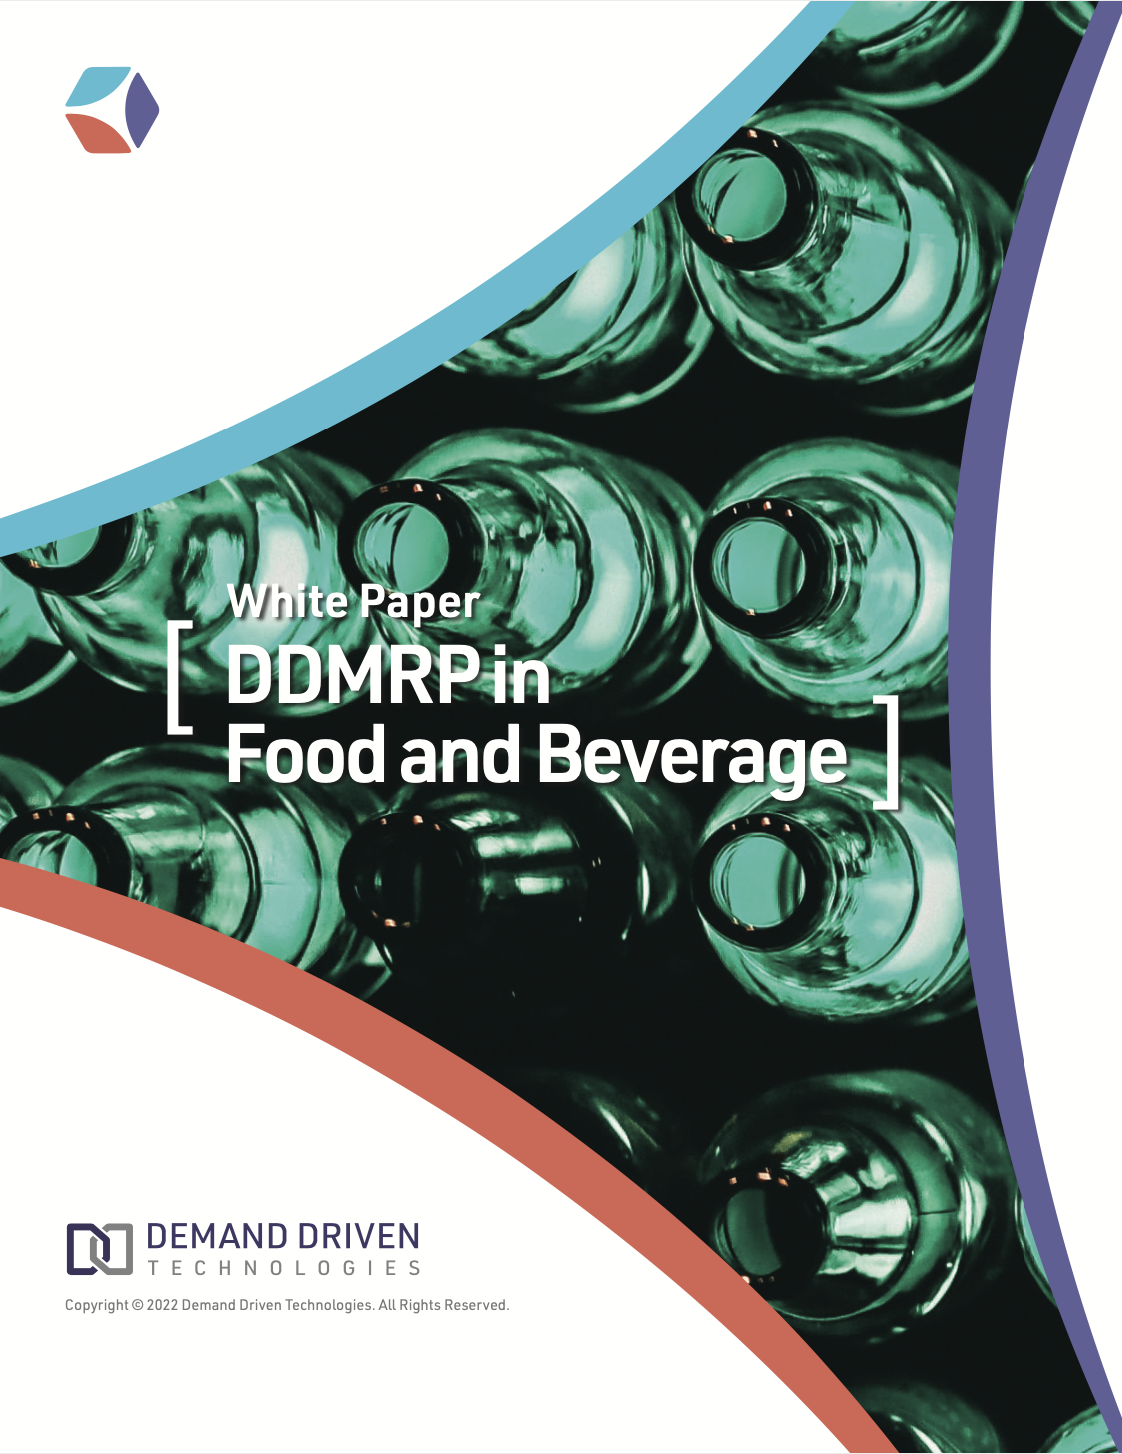 DDMRP in food and beverage white paper